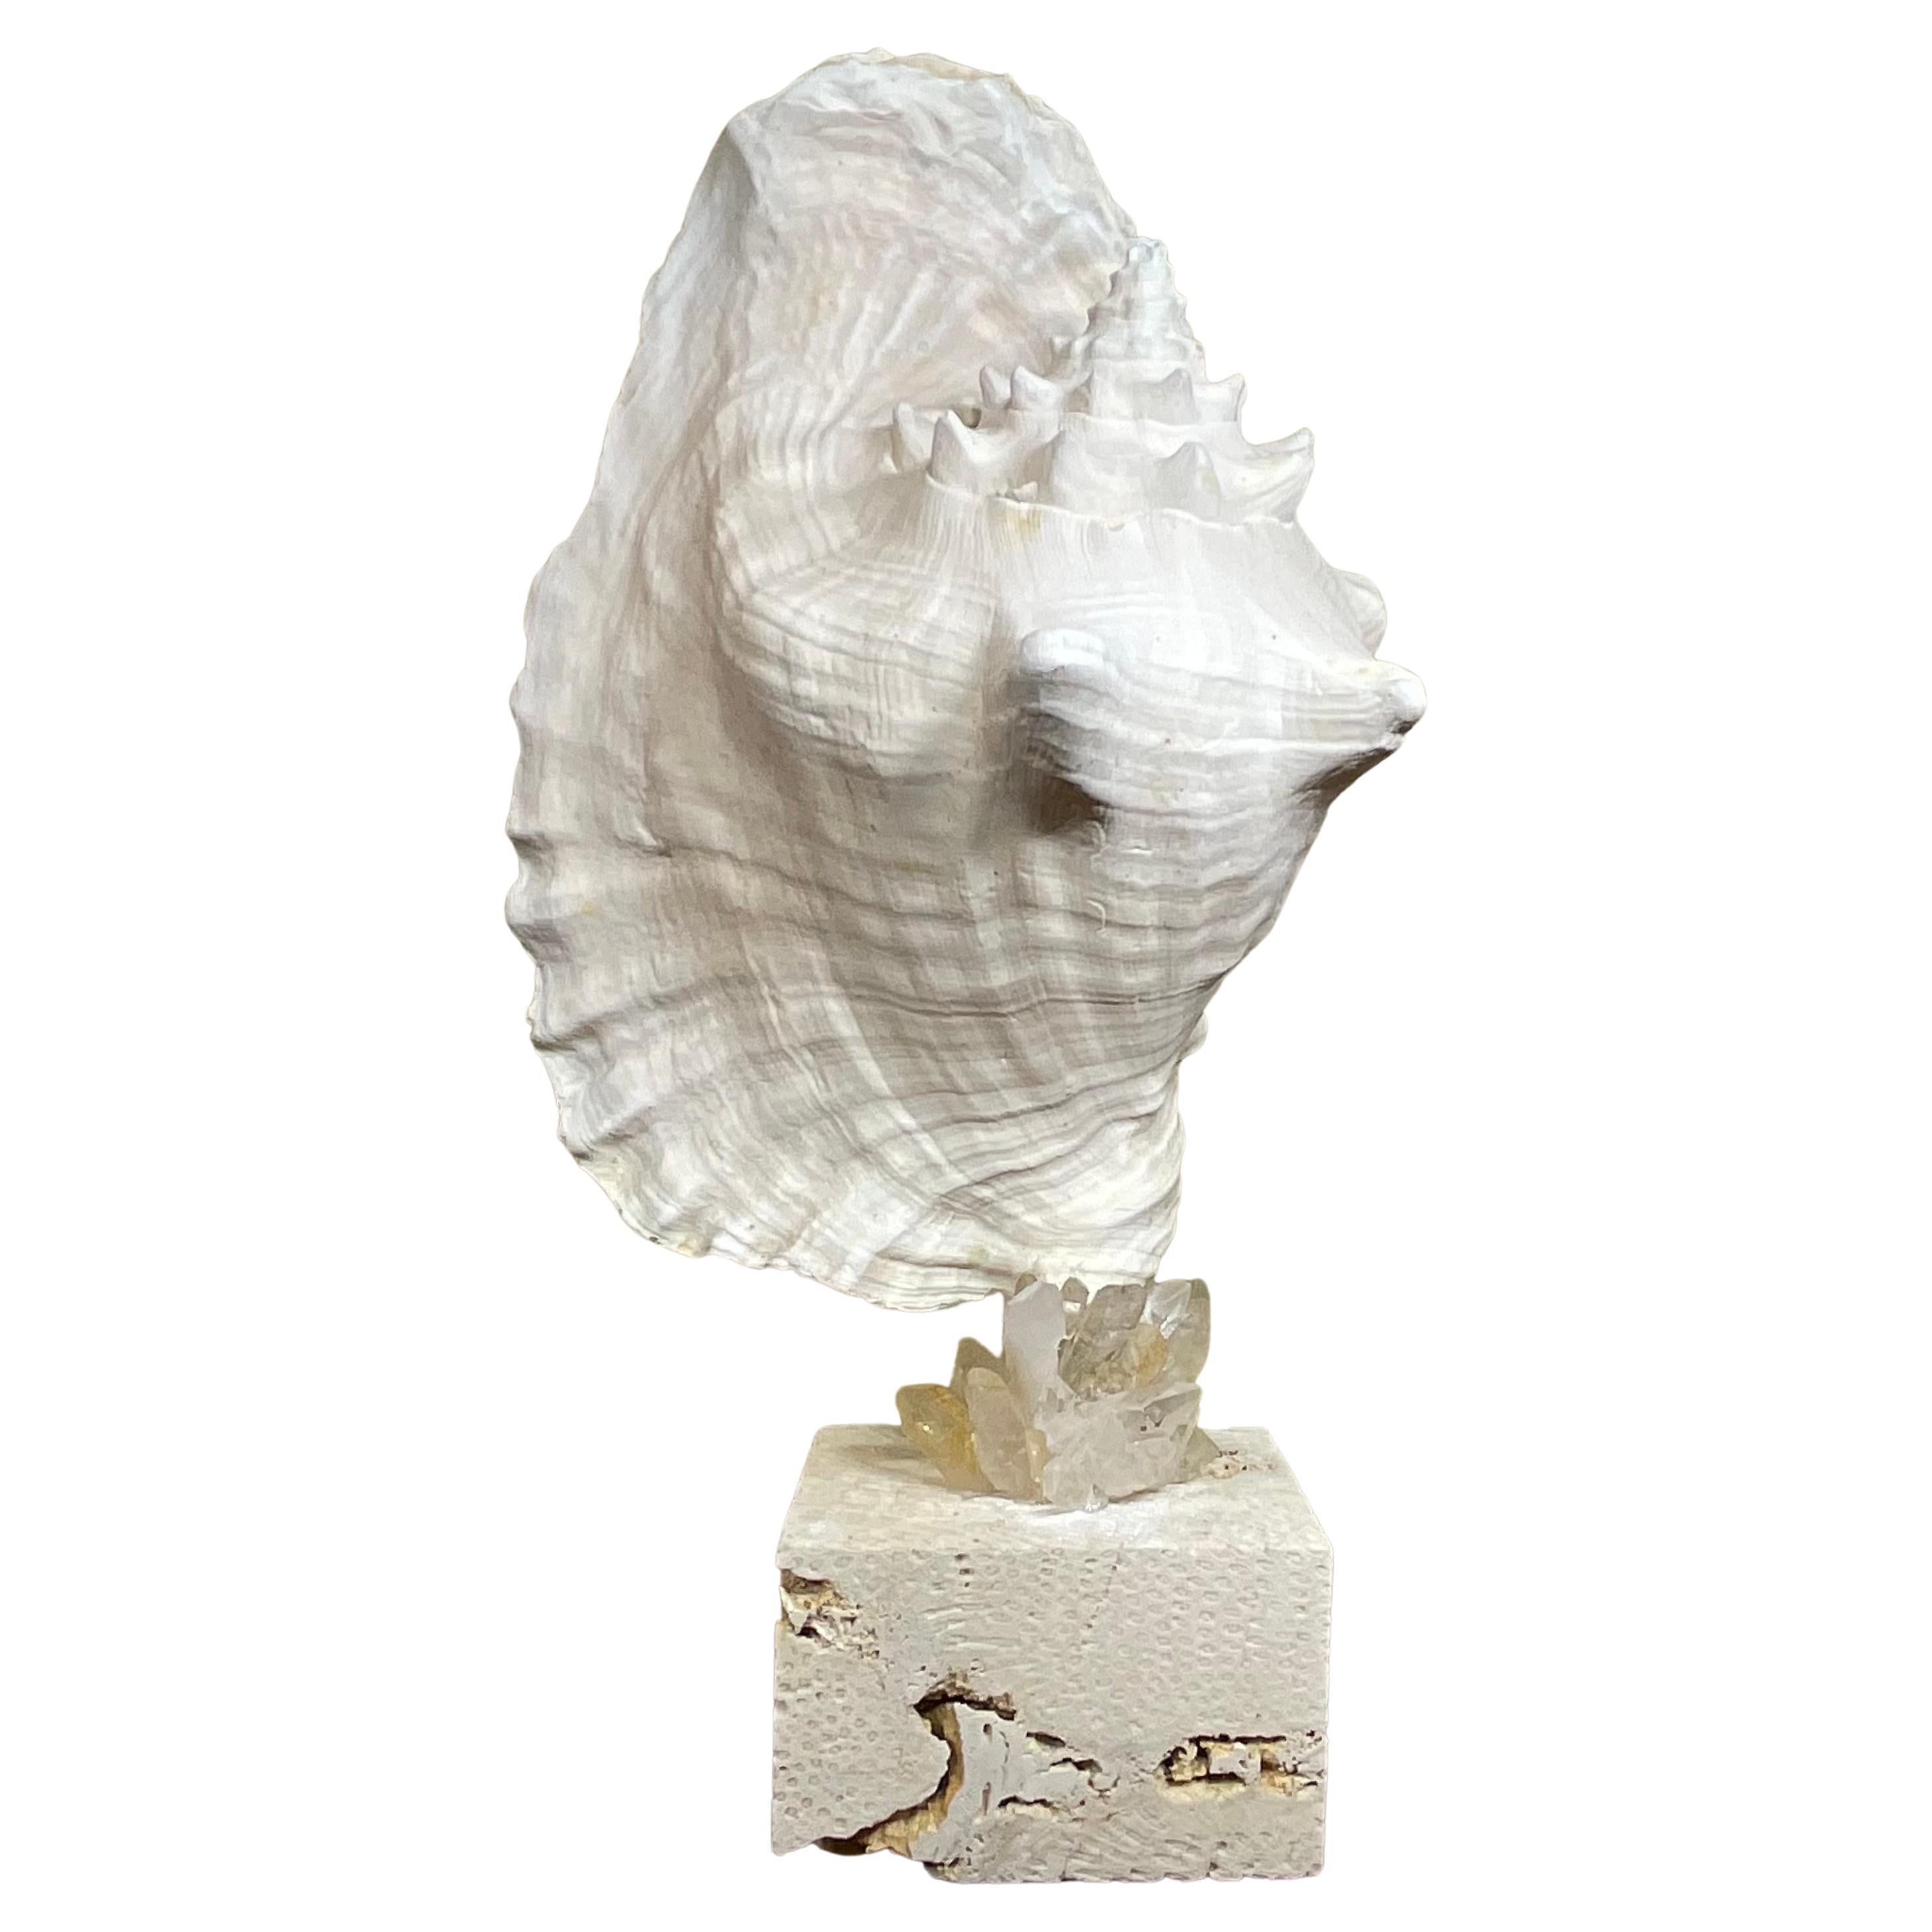 Crackled Conch Shell: A Stunning Glass Art Piece with a Coastal Twist ...